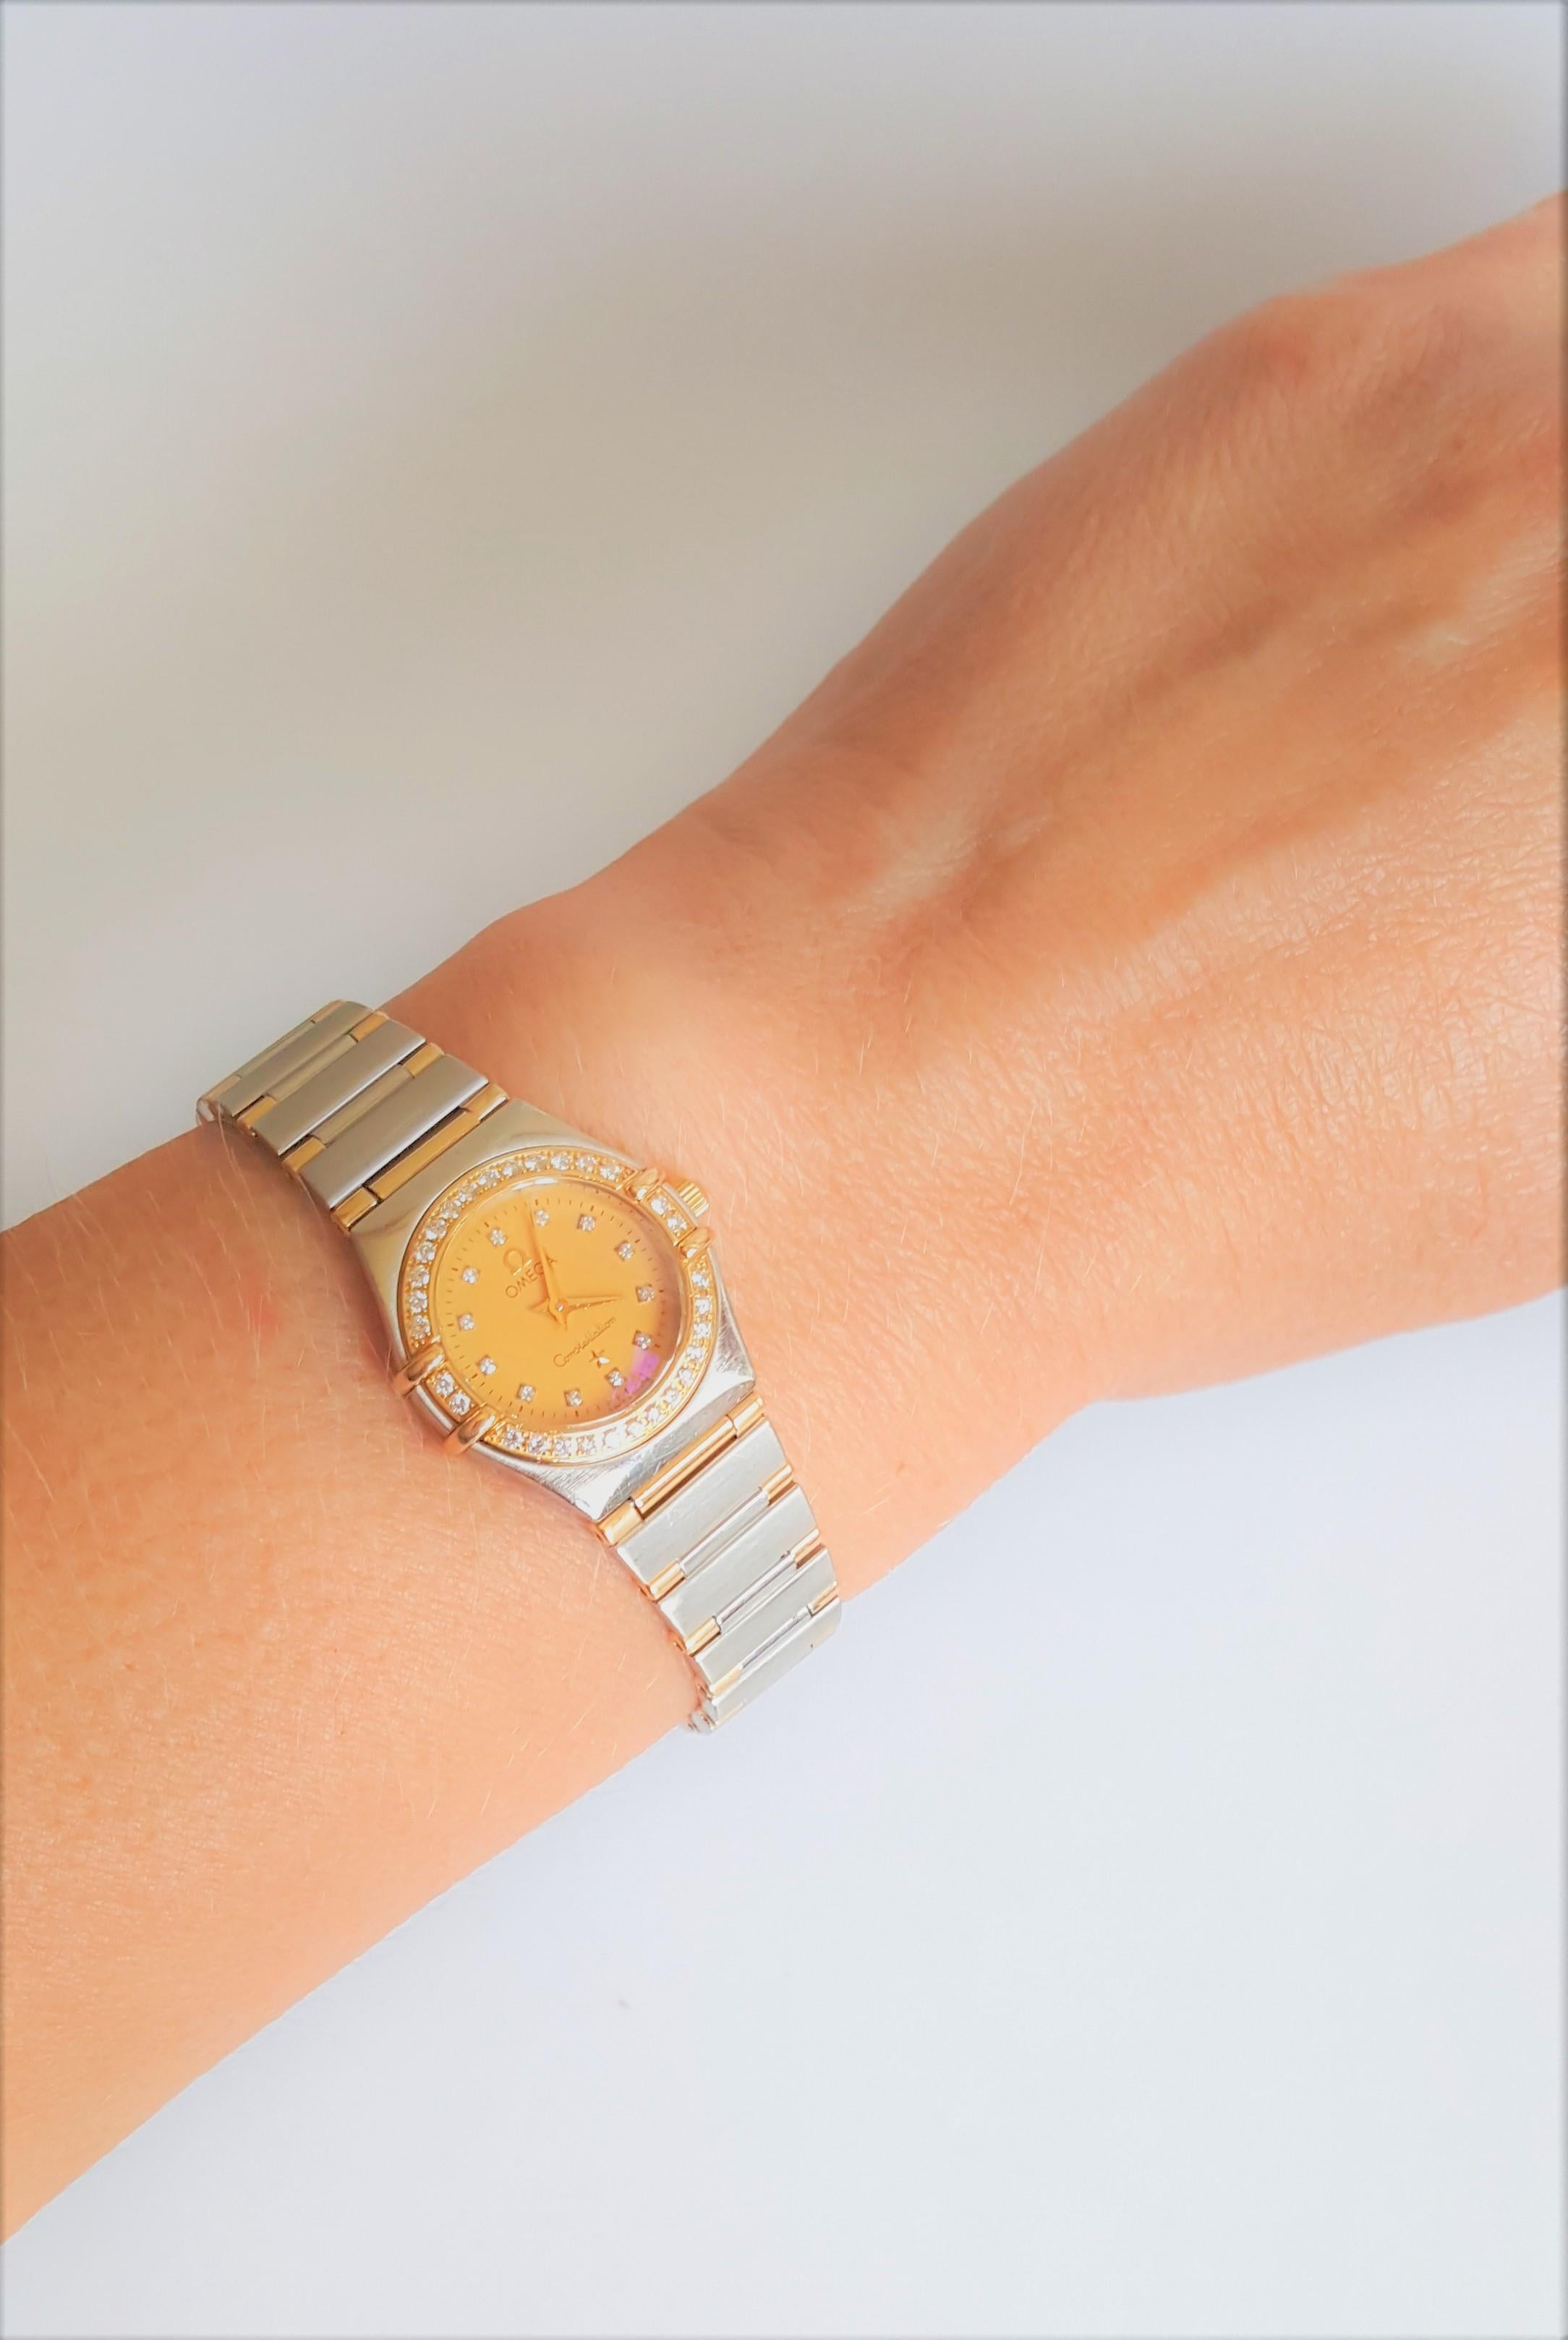 Ladies Omega Constellation 18kt yellow and stainless steel watch. This watch has just been fully serviced and in good working condition. The case is 24mm in diameter and is adorned with round diamonds on the bezel and dial; there are 42 diamonds